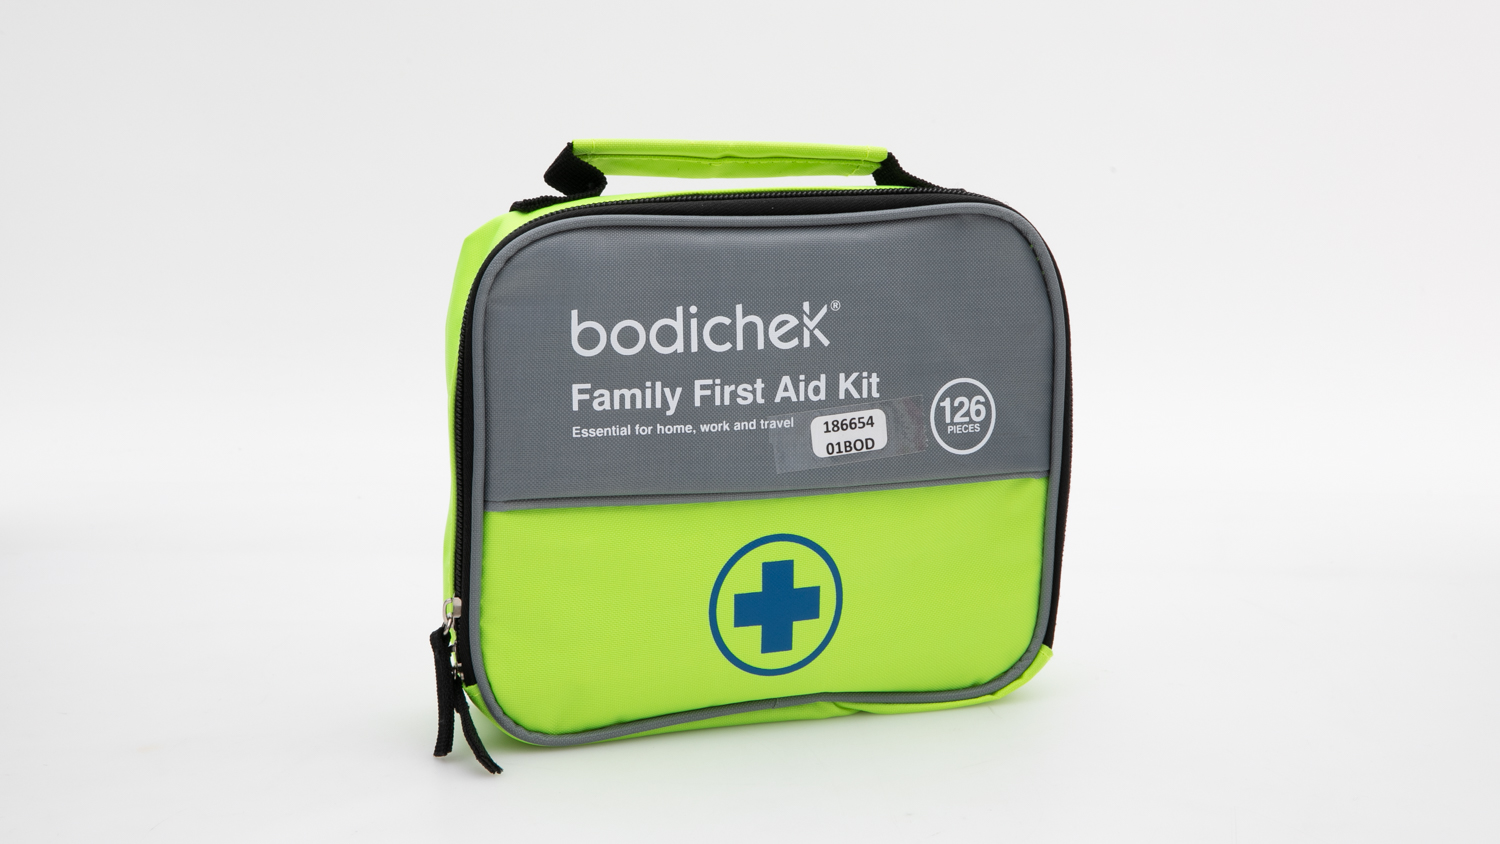 Bodicheck Family First Aid Kit carousel image